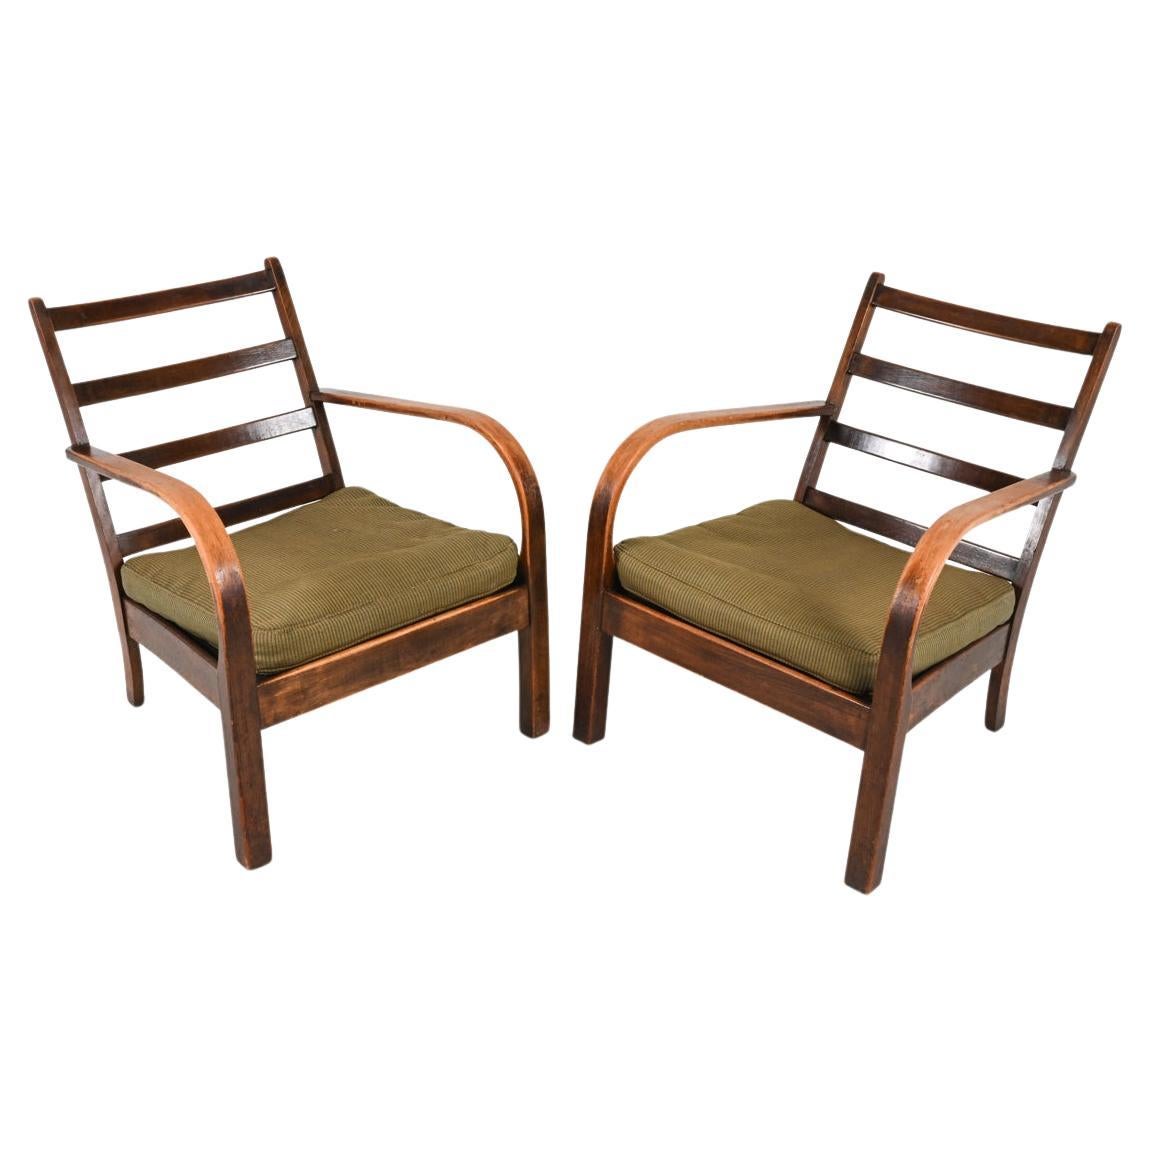 Pair of Art Deco Oak Lounge Chairs Attributed to Frits Schlegel for Fritz Hansen For Sale